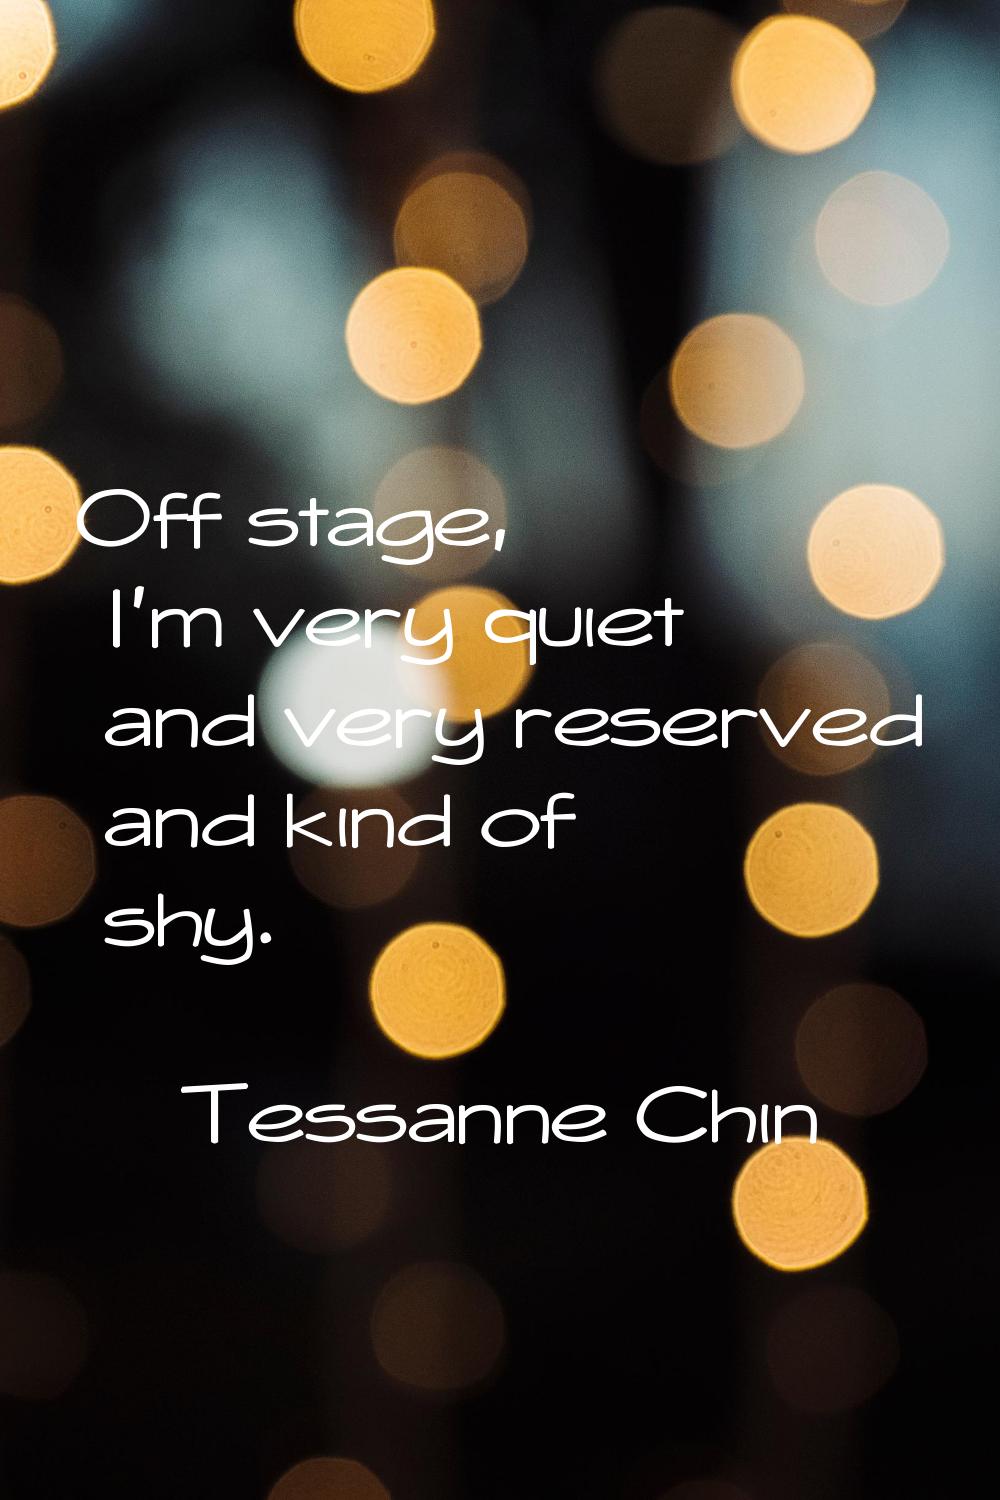 Off stage, I'm very quiet and very reserved and kind of shy.